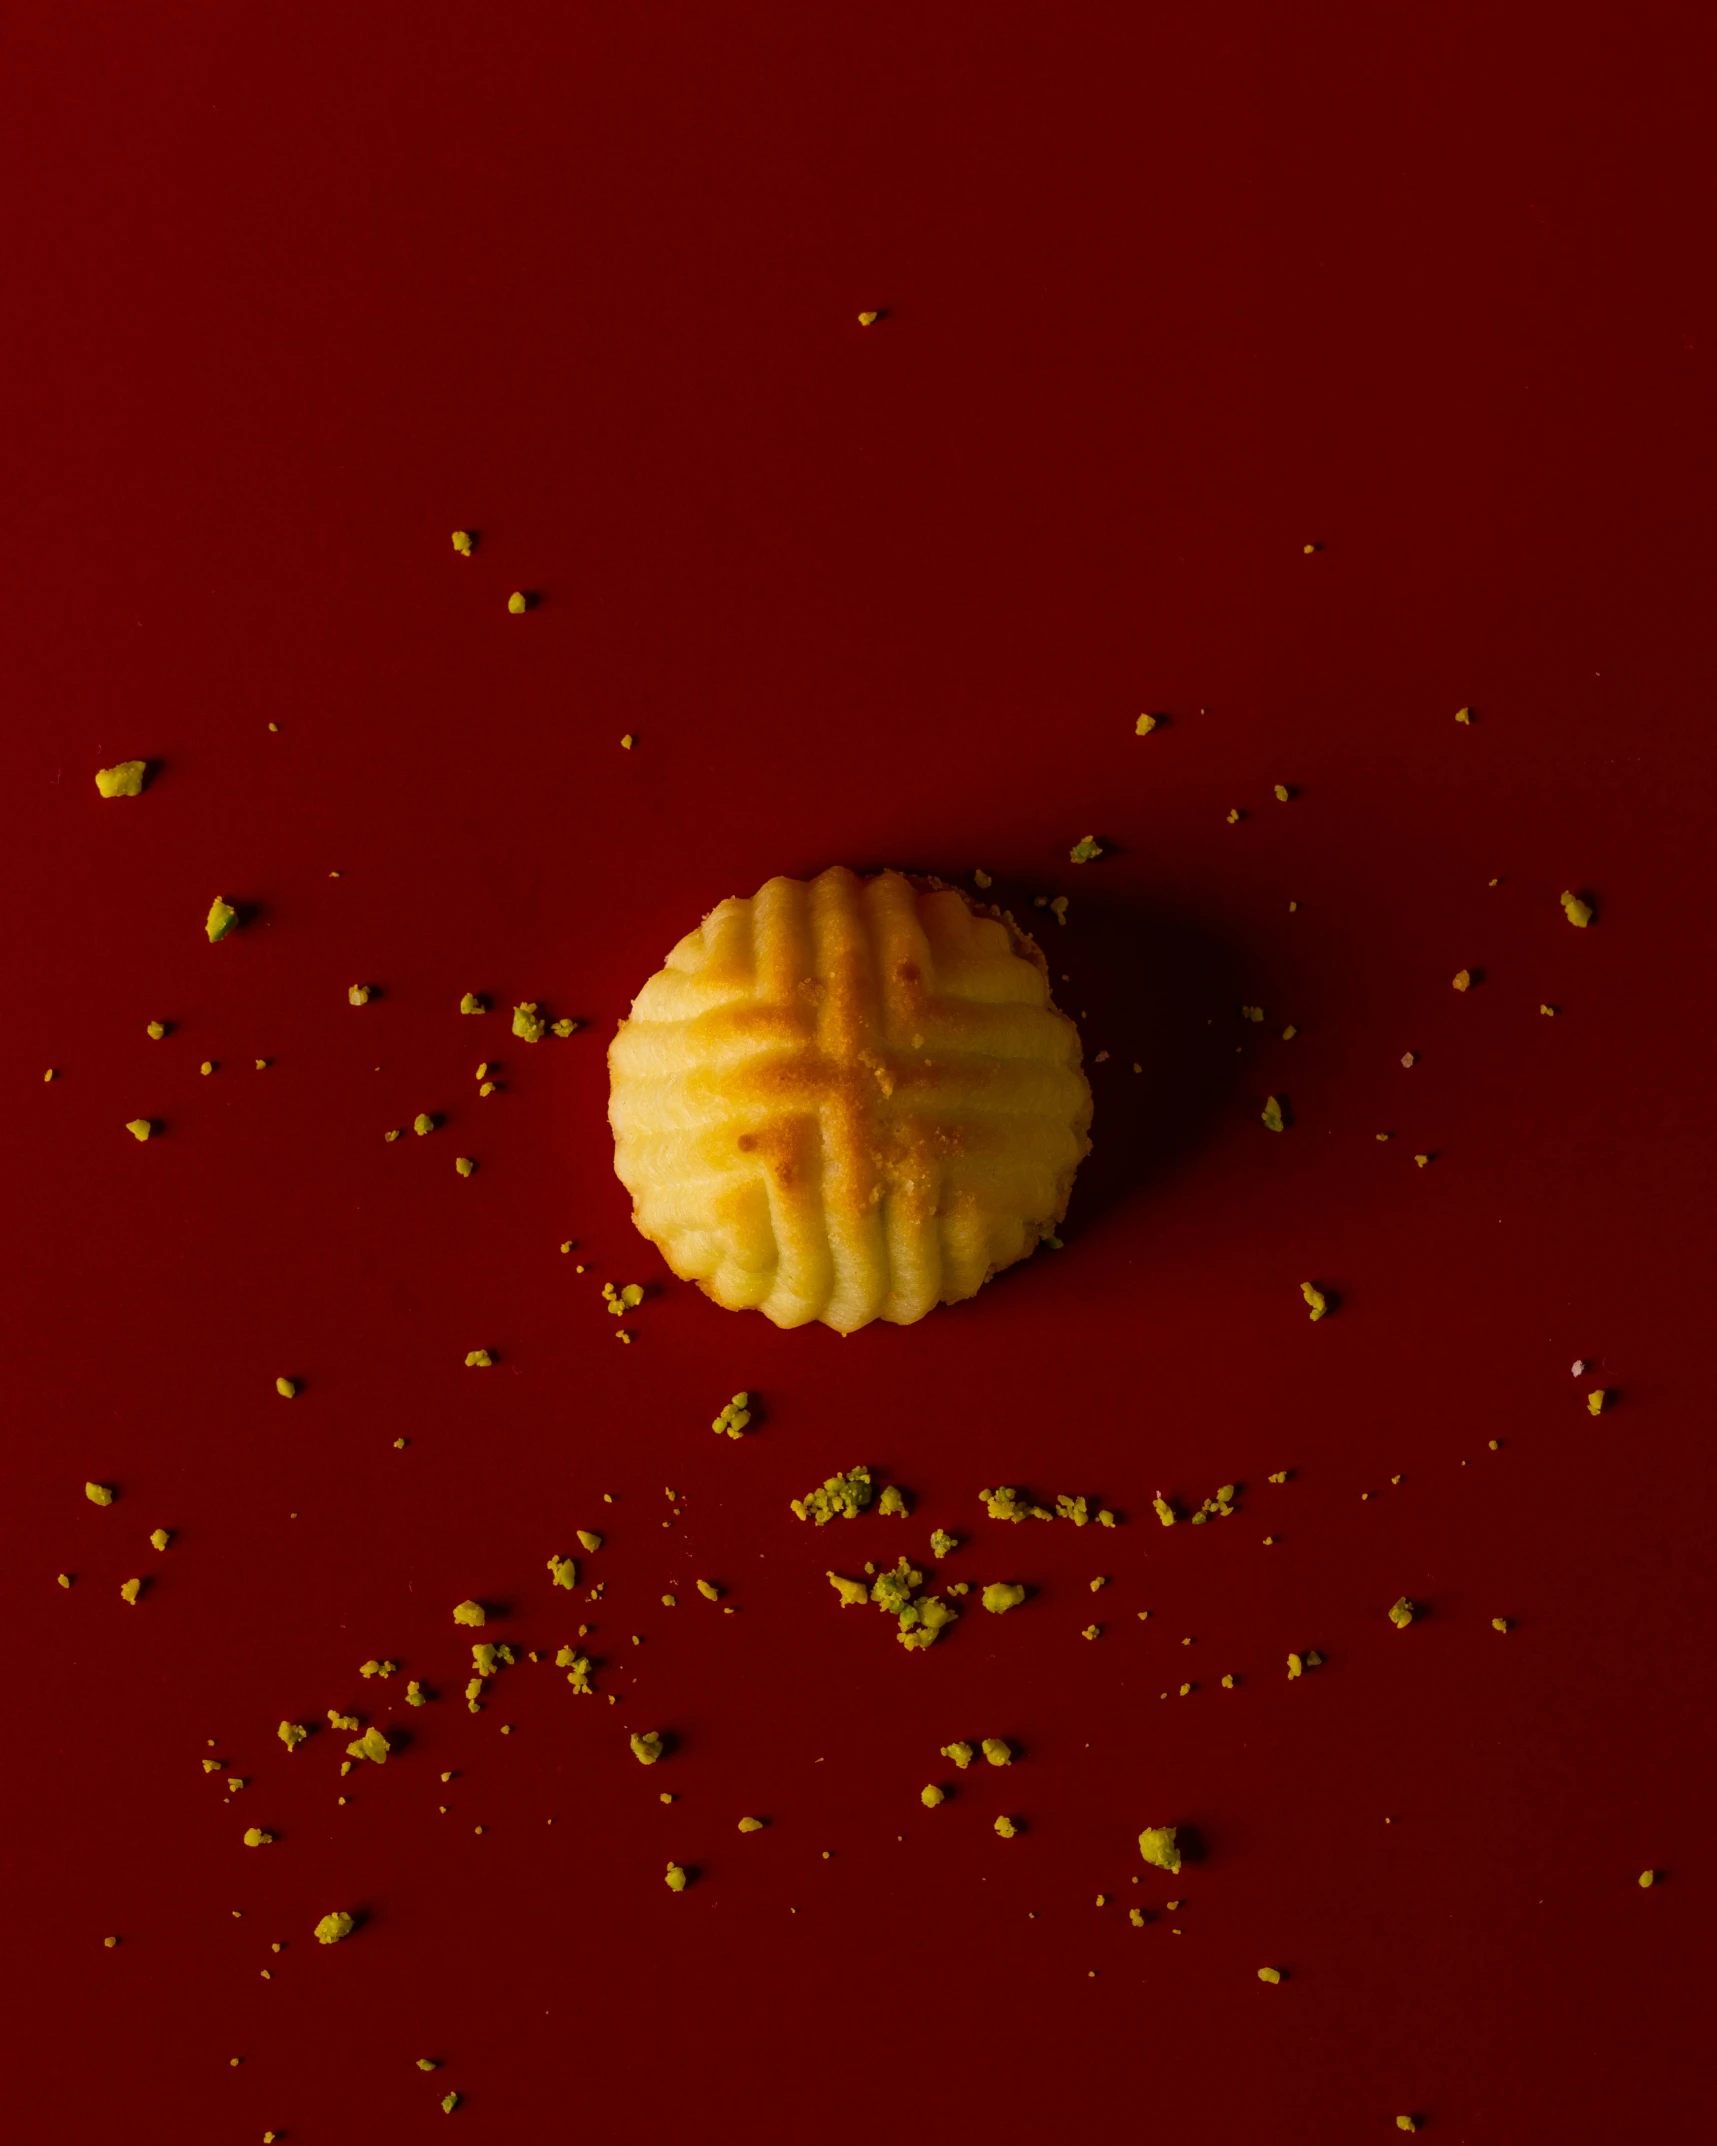 a macaroni and cheese pastry on a red table